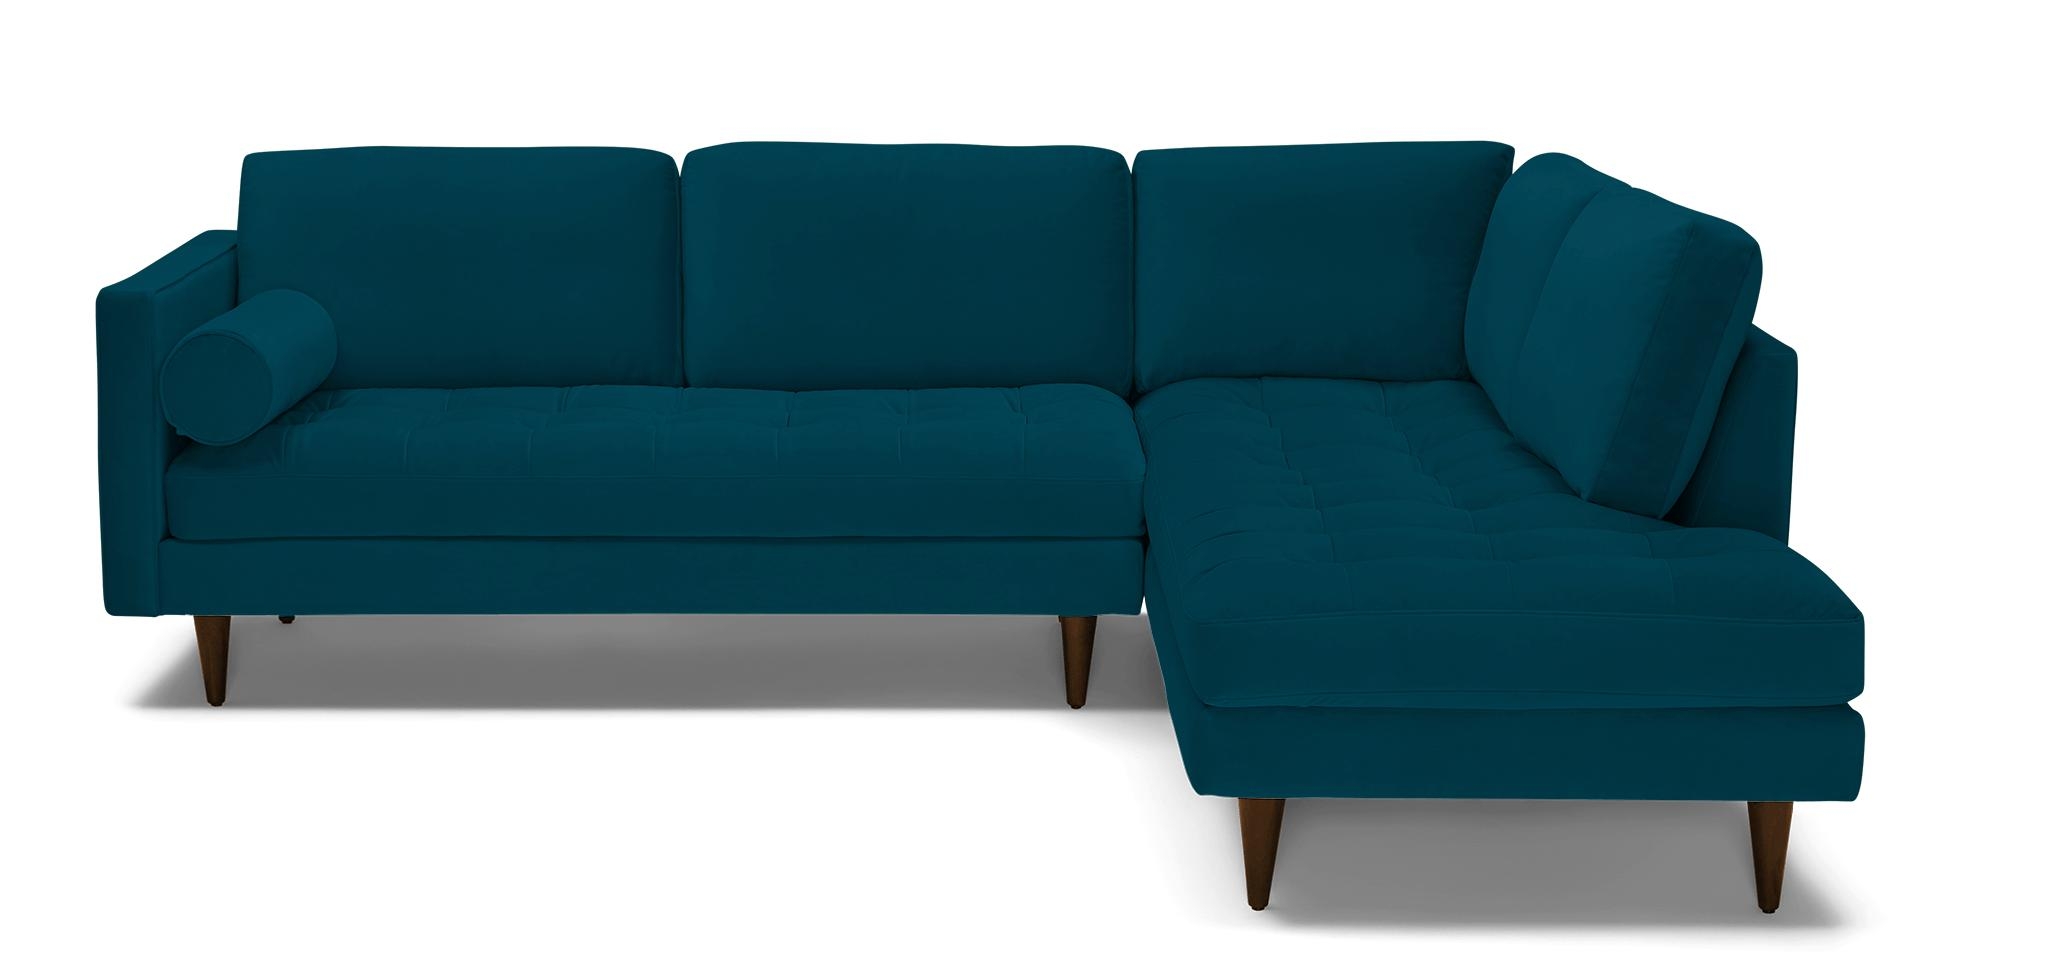 Blue Briar Mid Century Modern Sectional with Bumper - Key Largo Zenith Teal - Mocha - Right  - Image 0